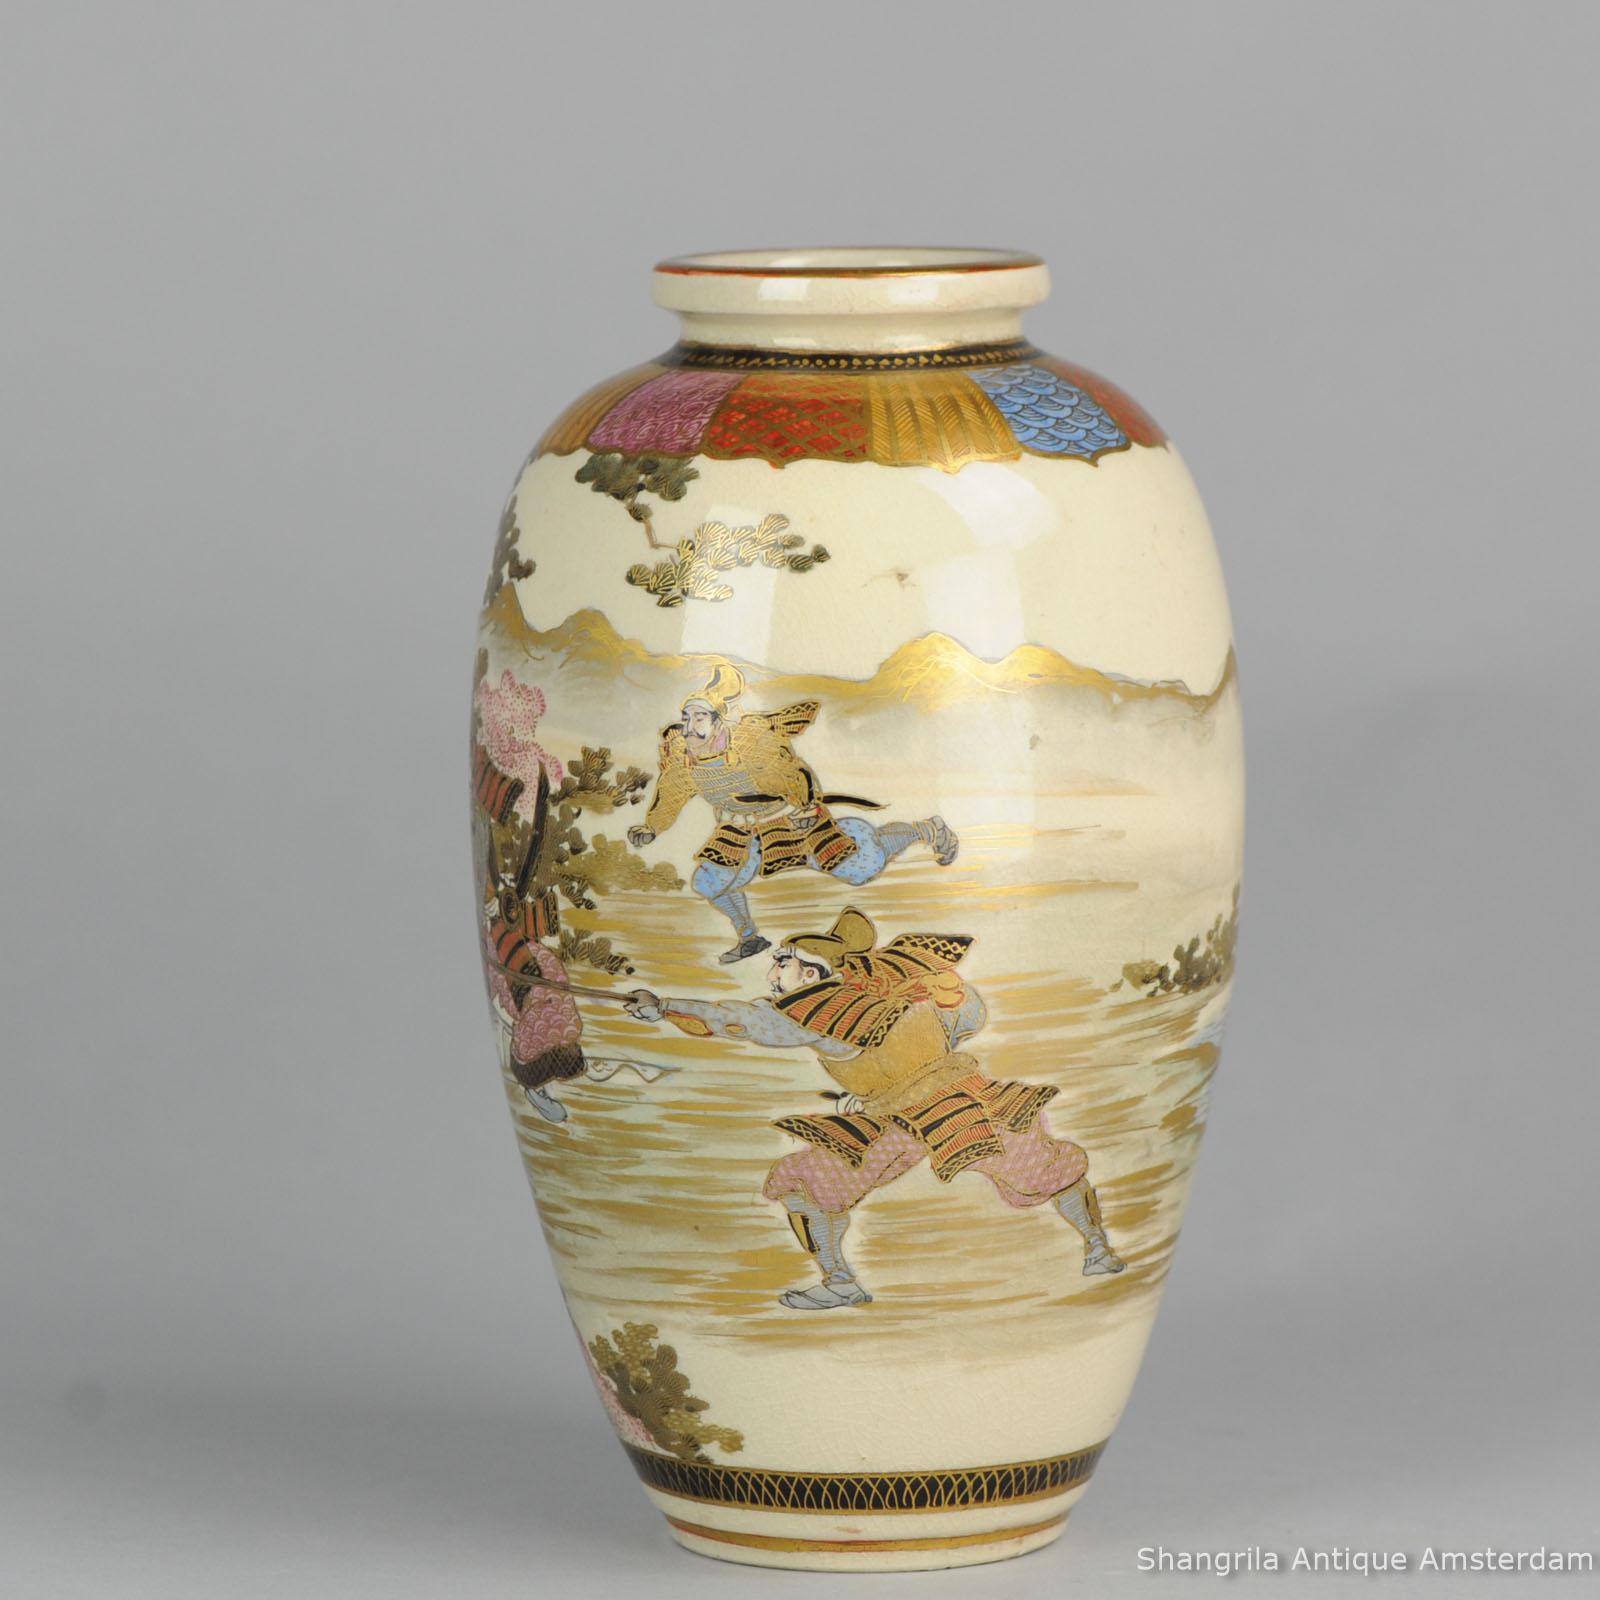 A very nice vase.

Condition
Overall condition B (Good used)). Great, But with a hole in the base. Size 245mm approximate.

Period
19th Meiji Periode (1867-1912).